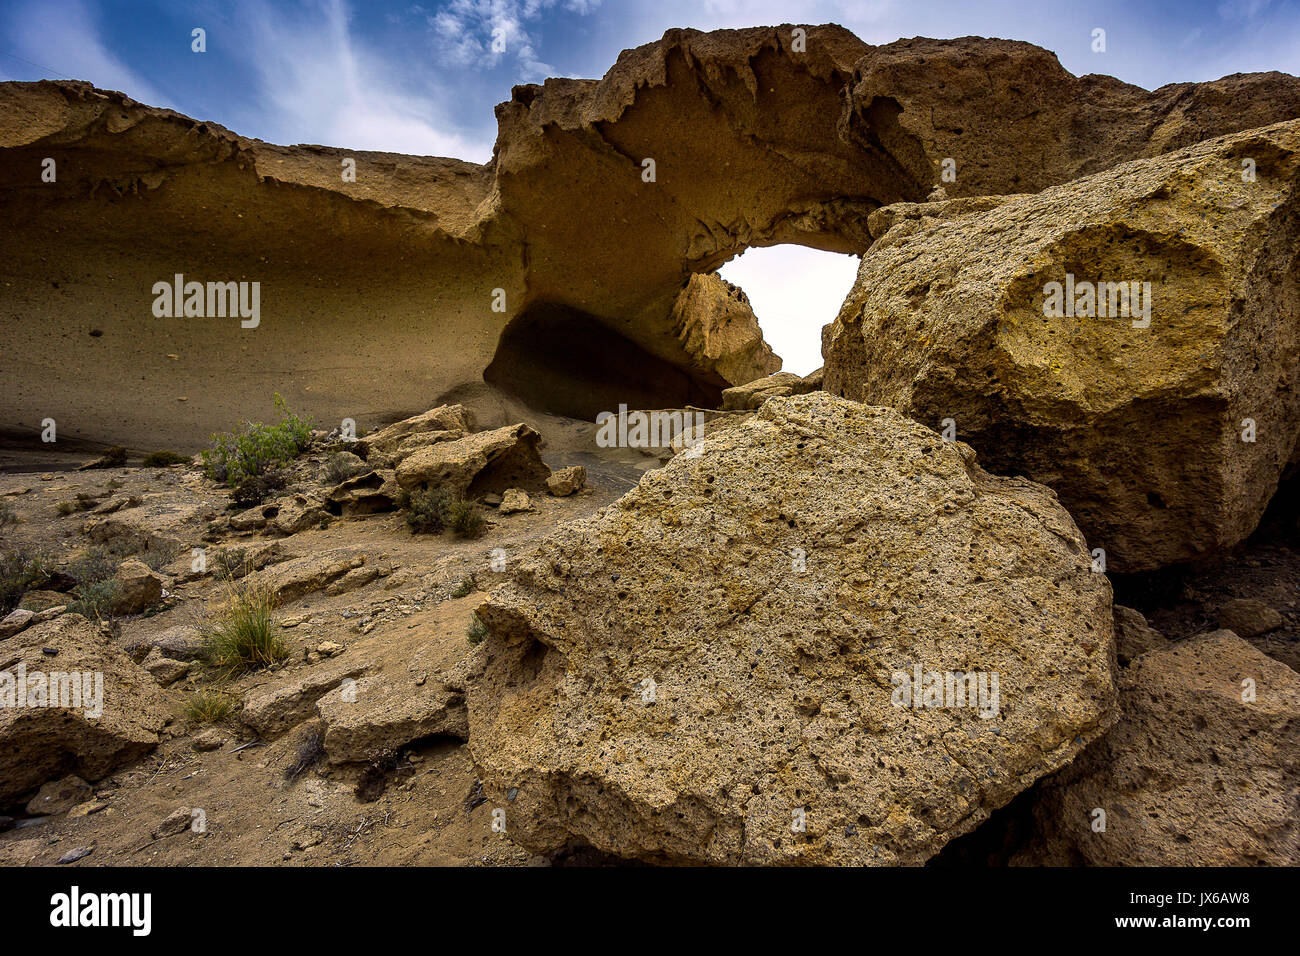 This stone arch is called Arco de Tajao. You can find it on the Canary island Tenerife in Spain Stock Photo